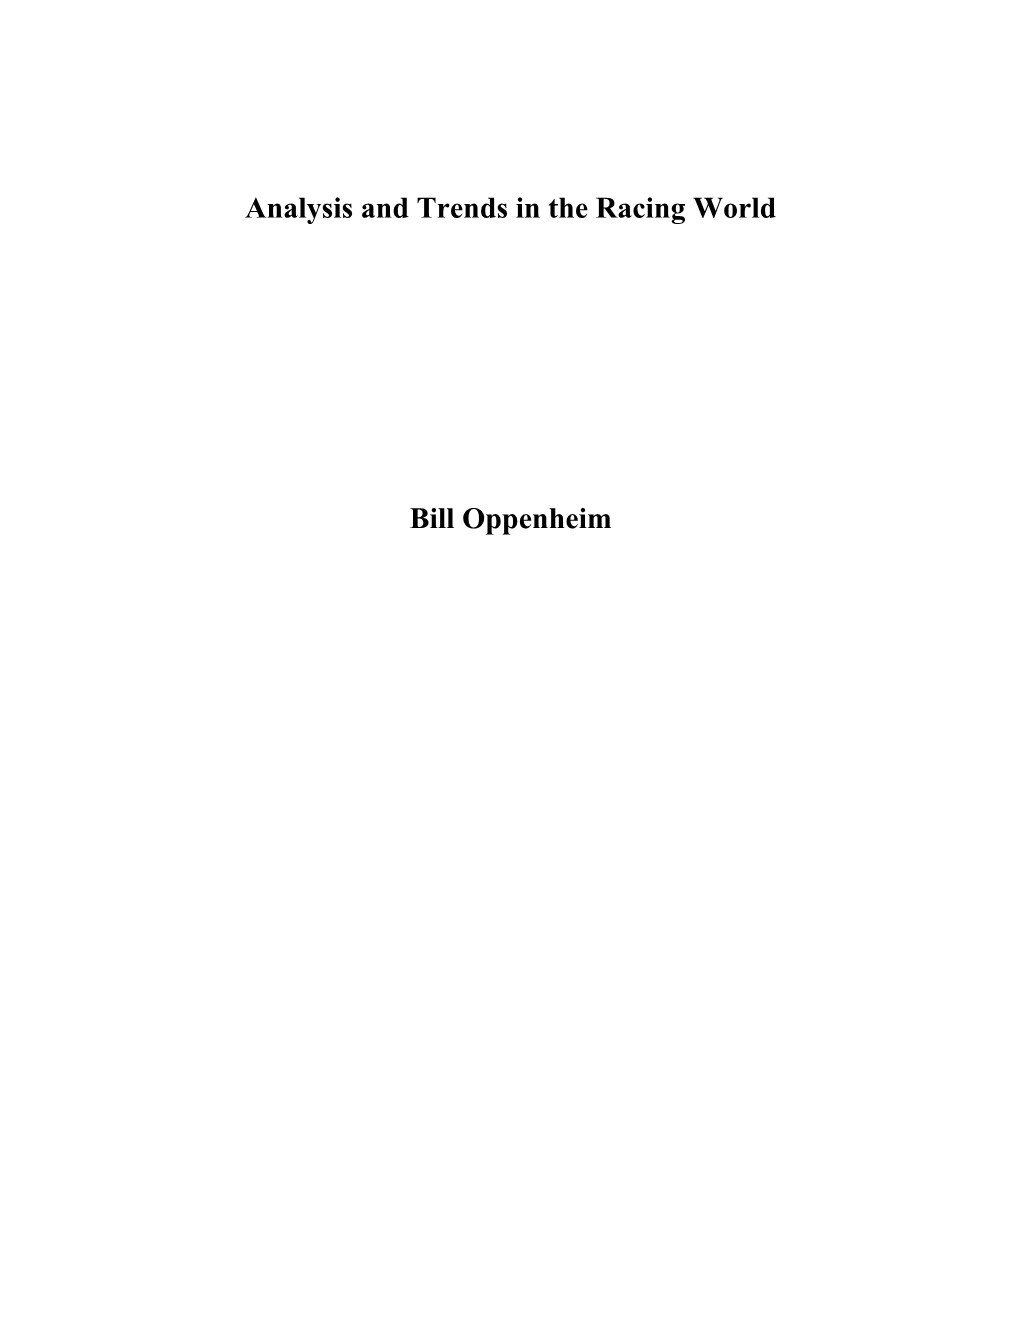 Analysis and Trends in the Racing World